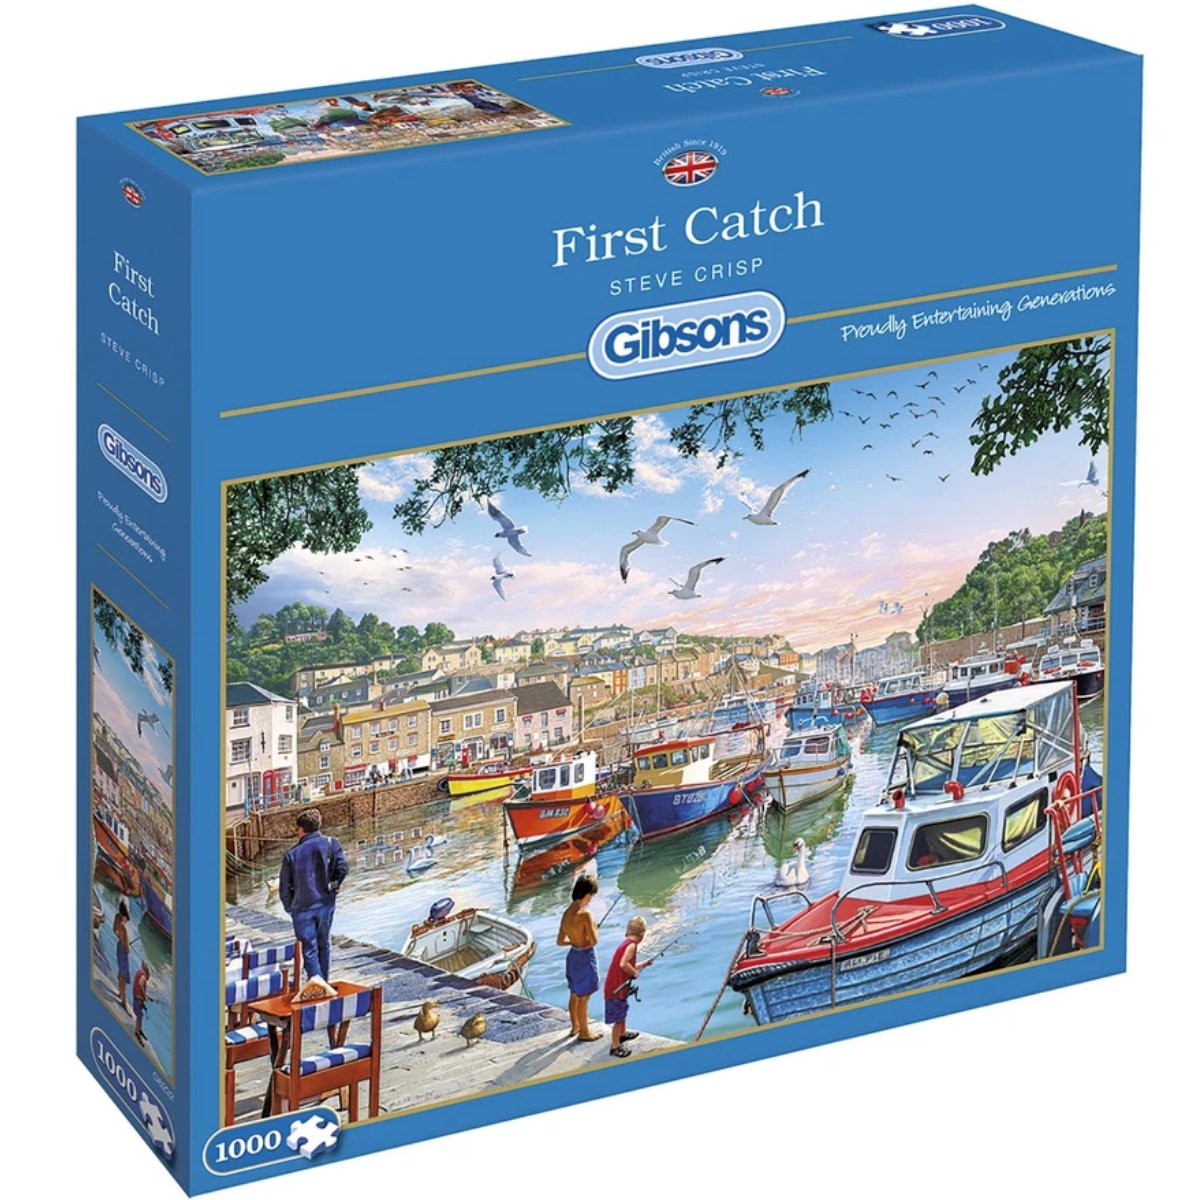 Gibsons First Catch Jigsaw Puzzle (1000 Pieces)